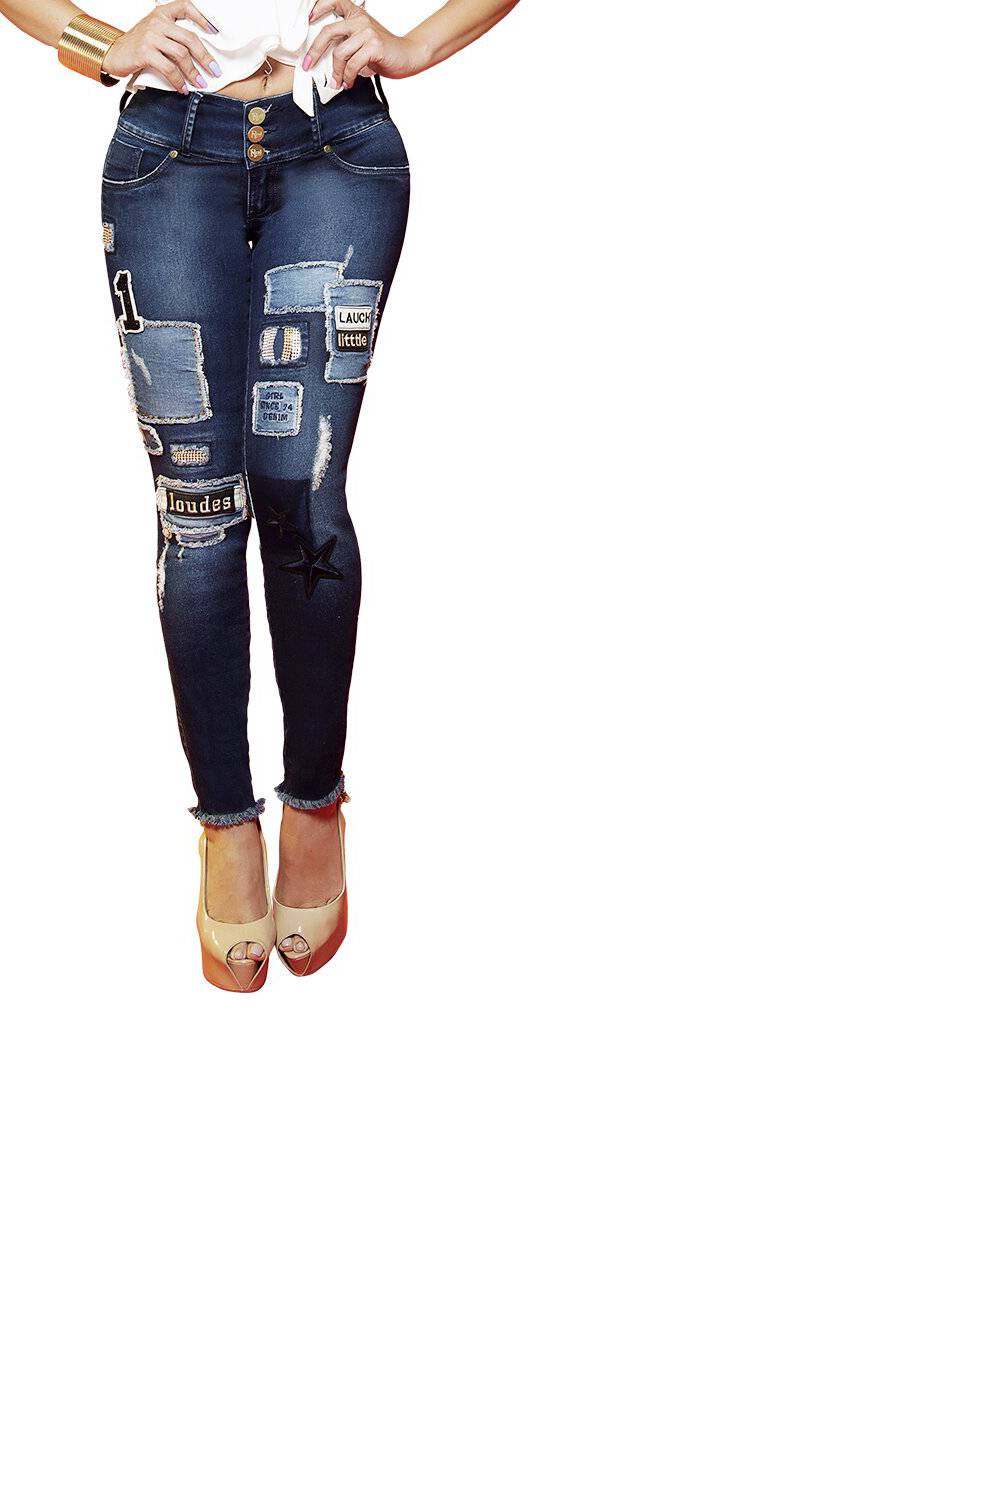 REAL JEANS - Jean Push Up Mujer